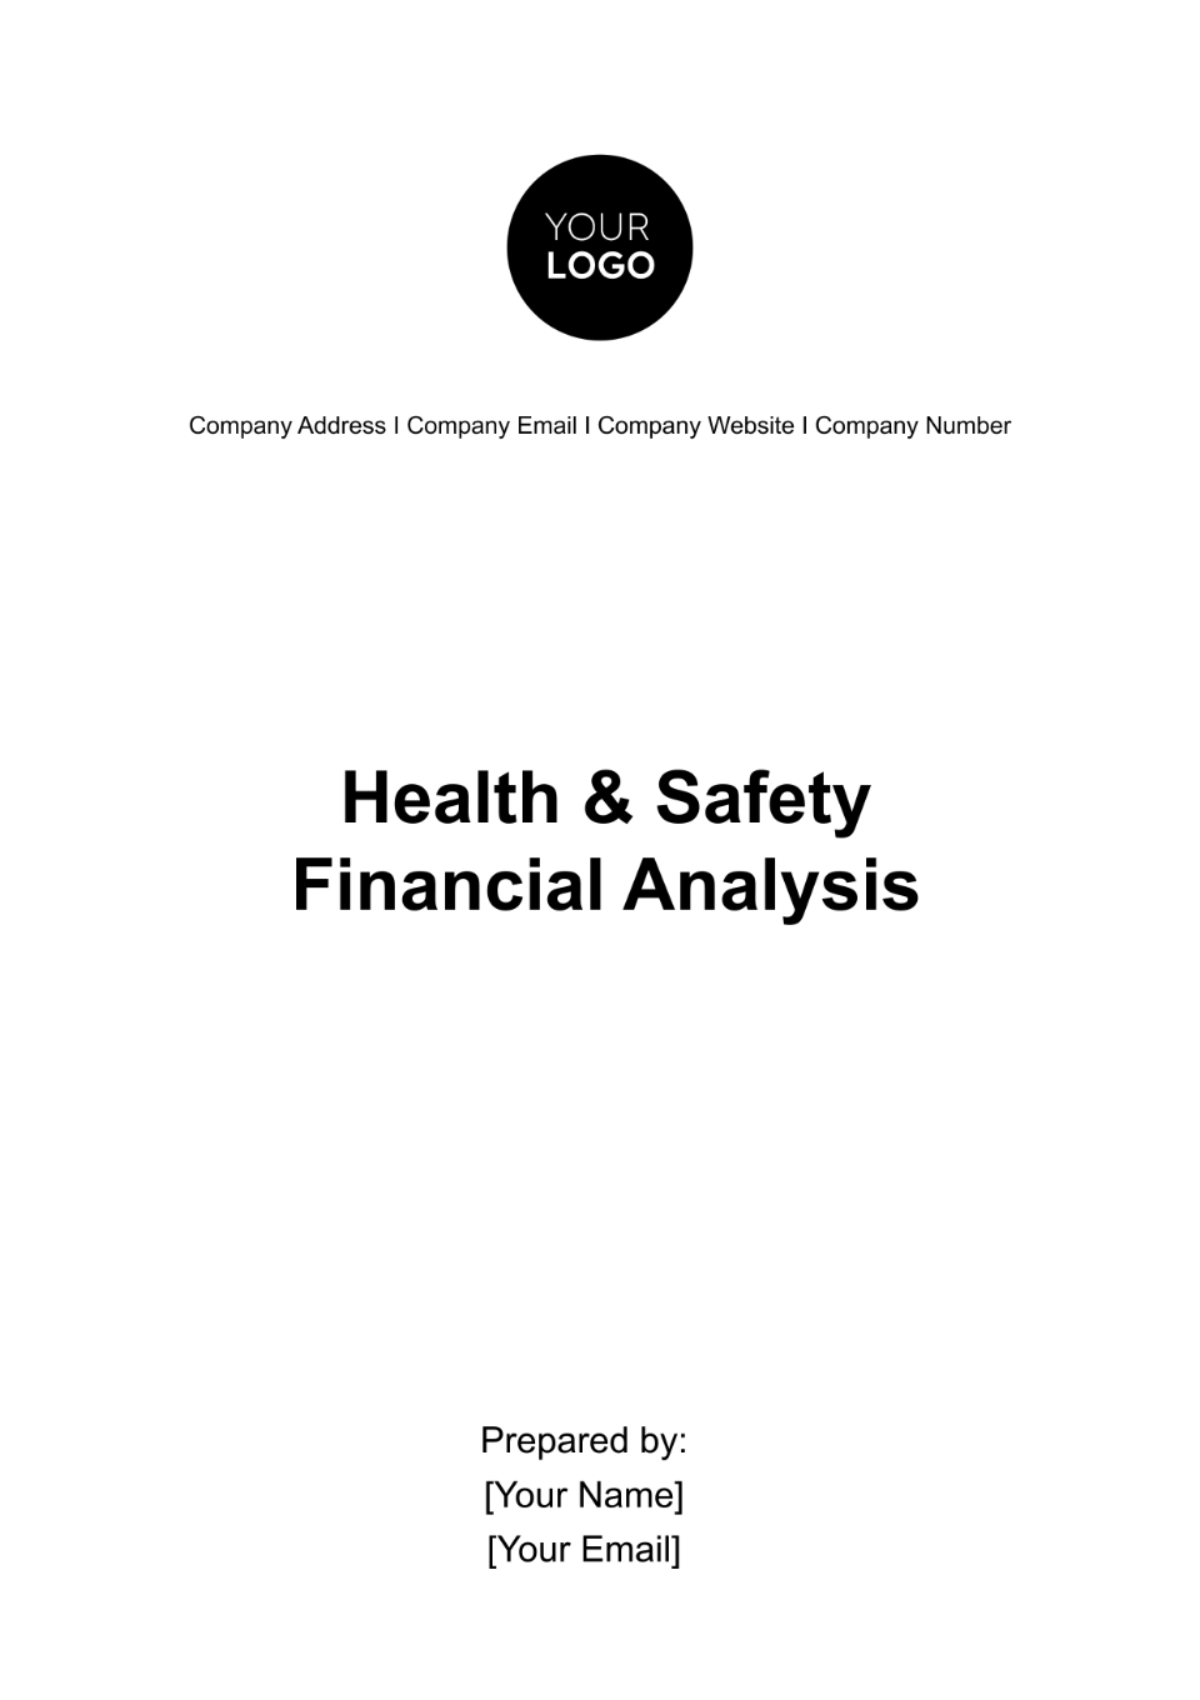 Health & Safety Training Financial Analysis Template